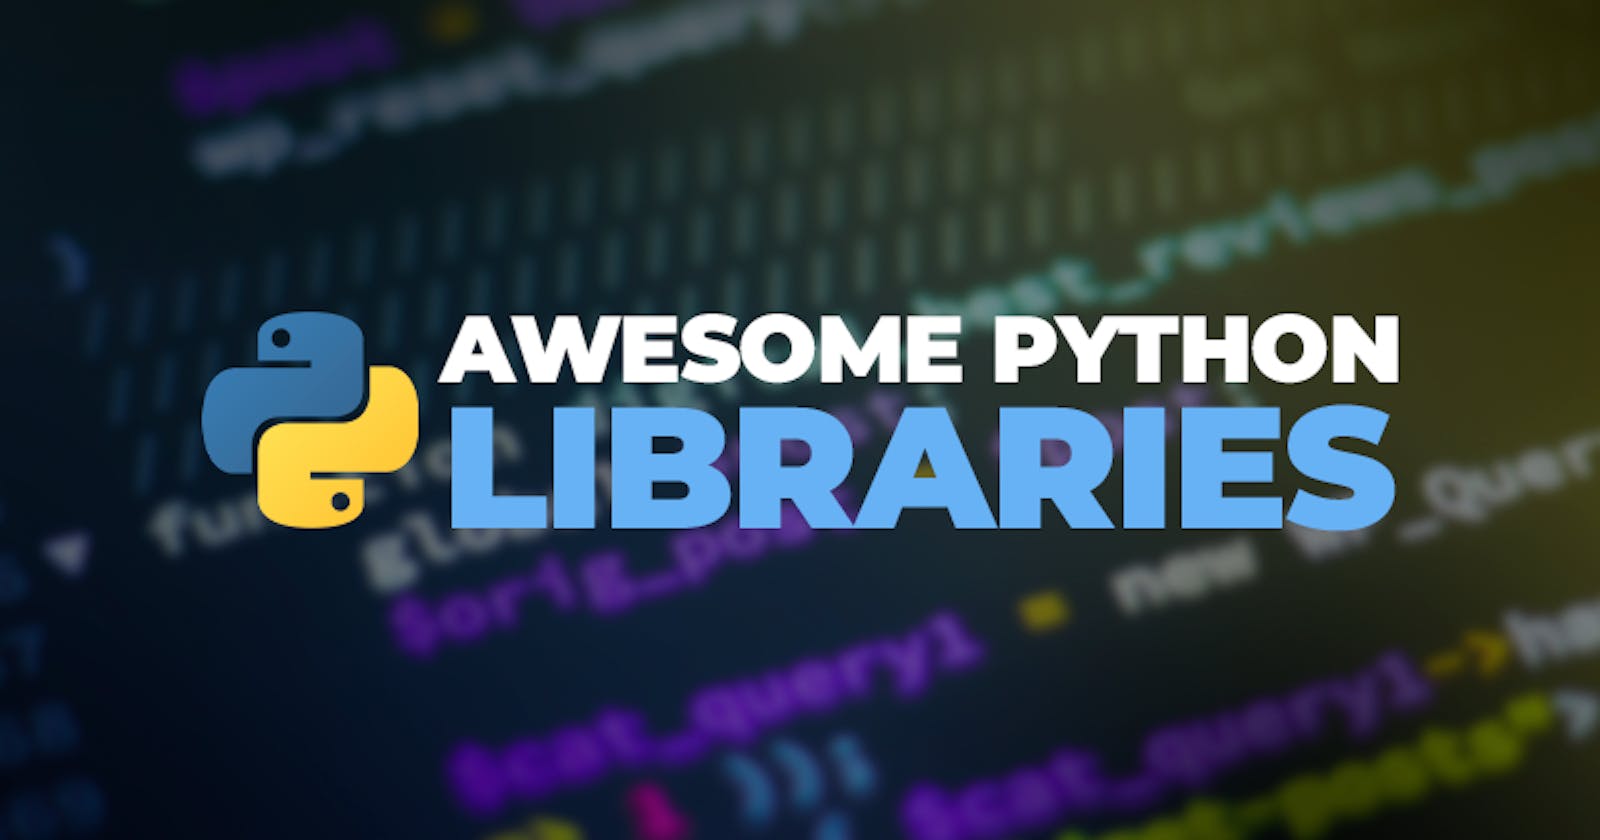 15 AWESOME PYTHON LIBRARIES FOR DEVELOPERS